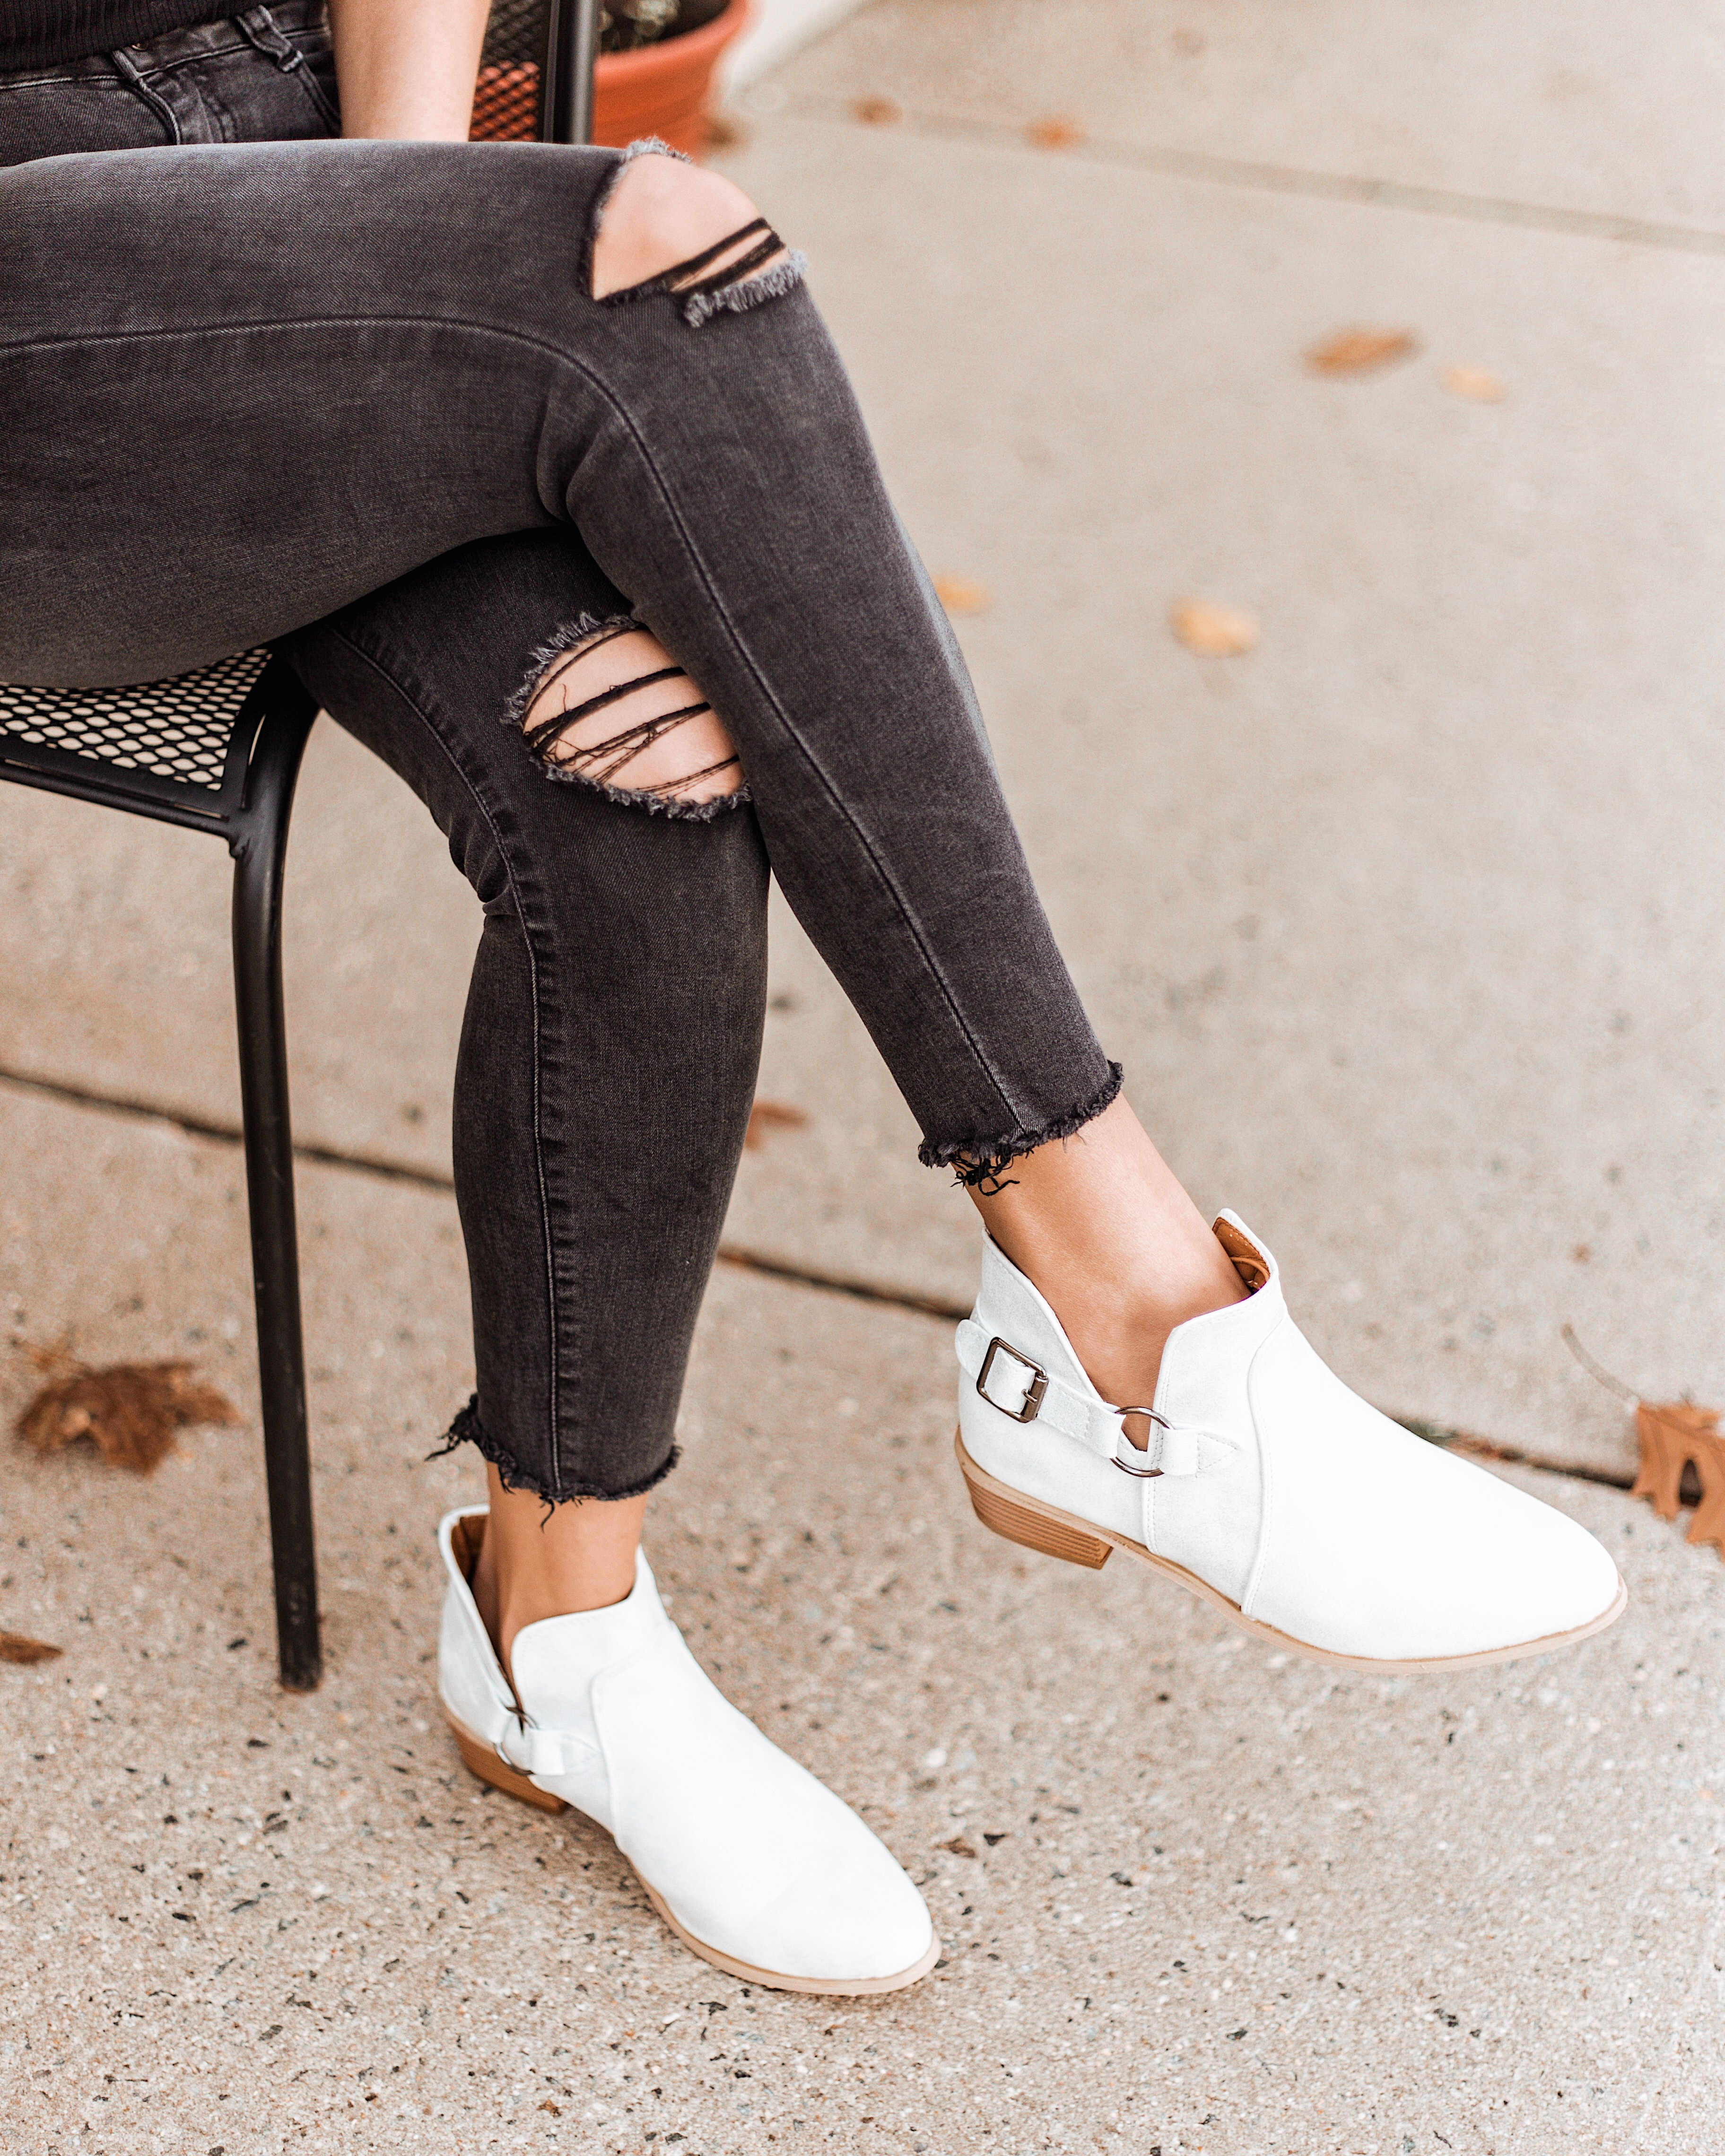 The White Booties Trend